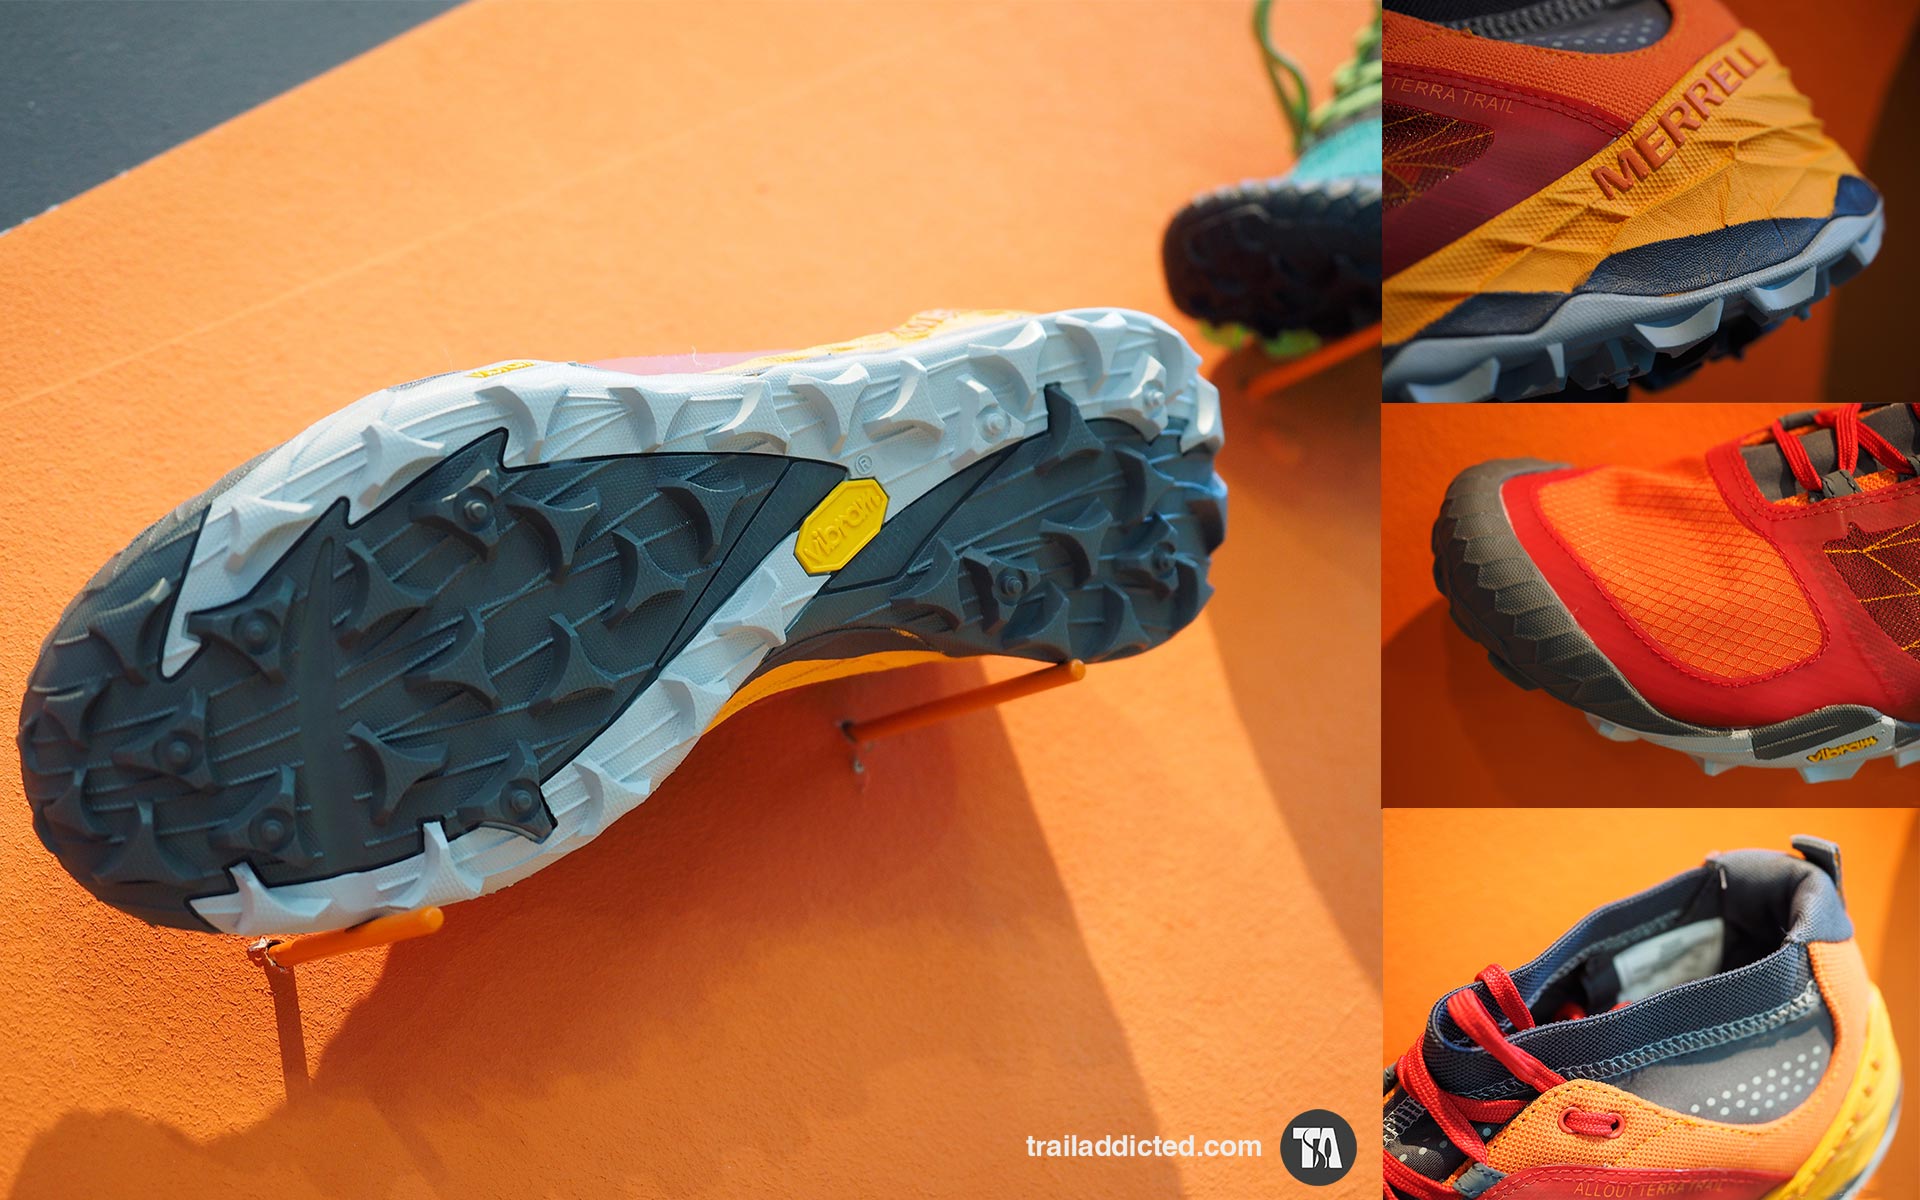 OutdoorShow2015_Merrell_TrailAddicted.com_TRAIL_2 - Trail Addicted